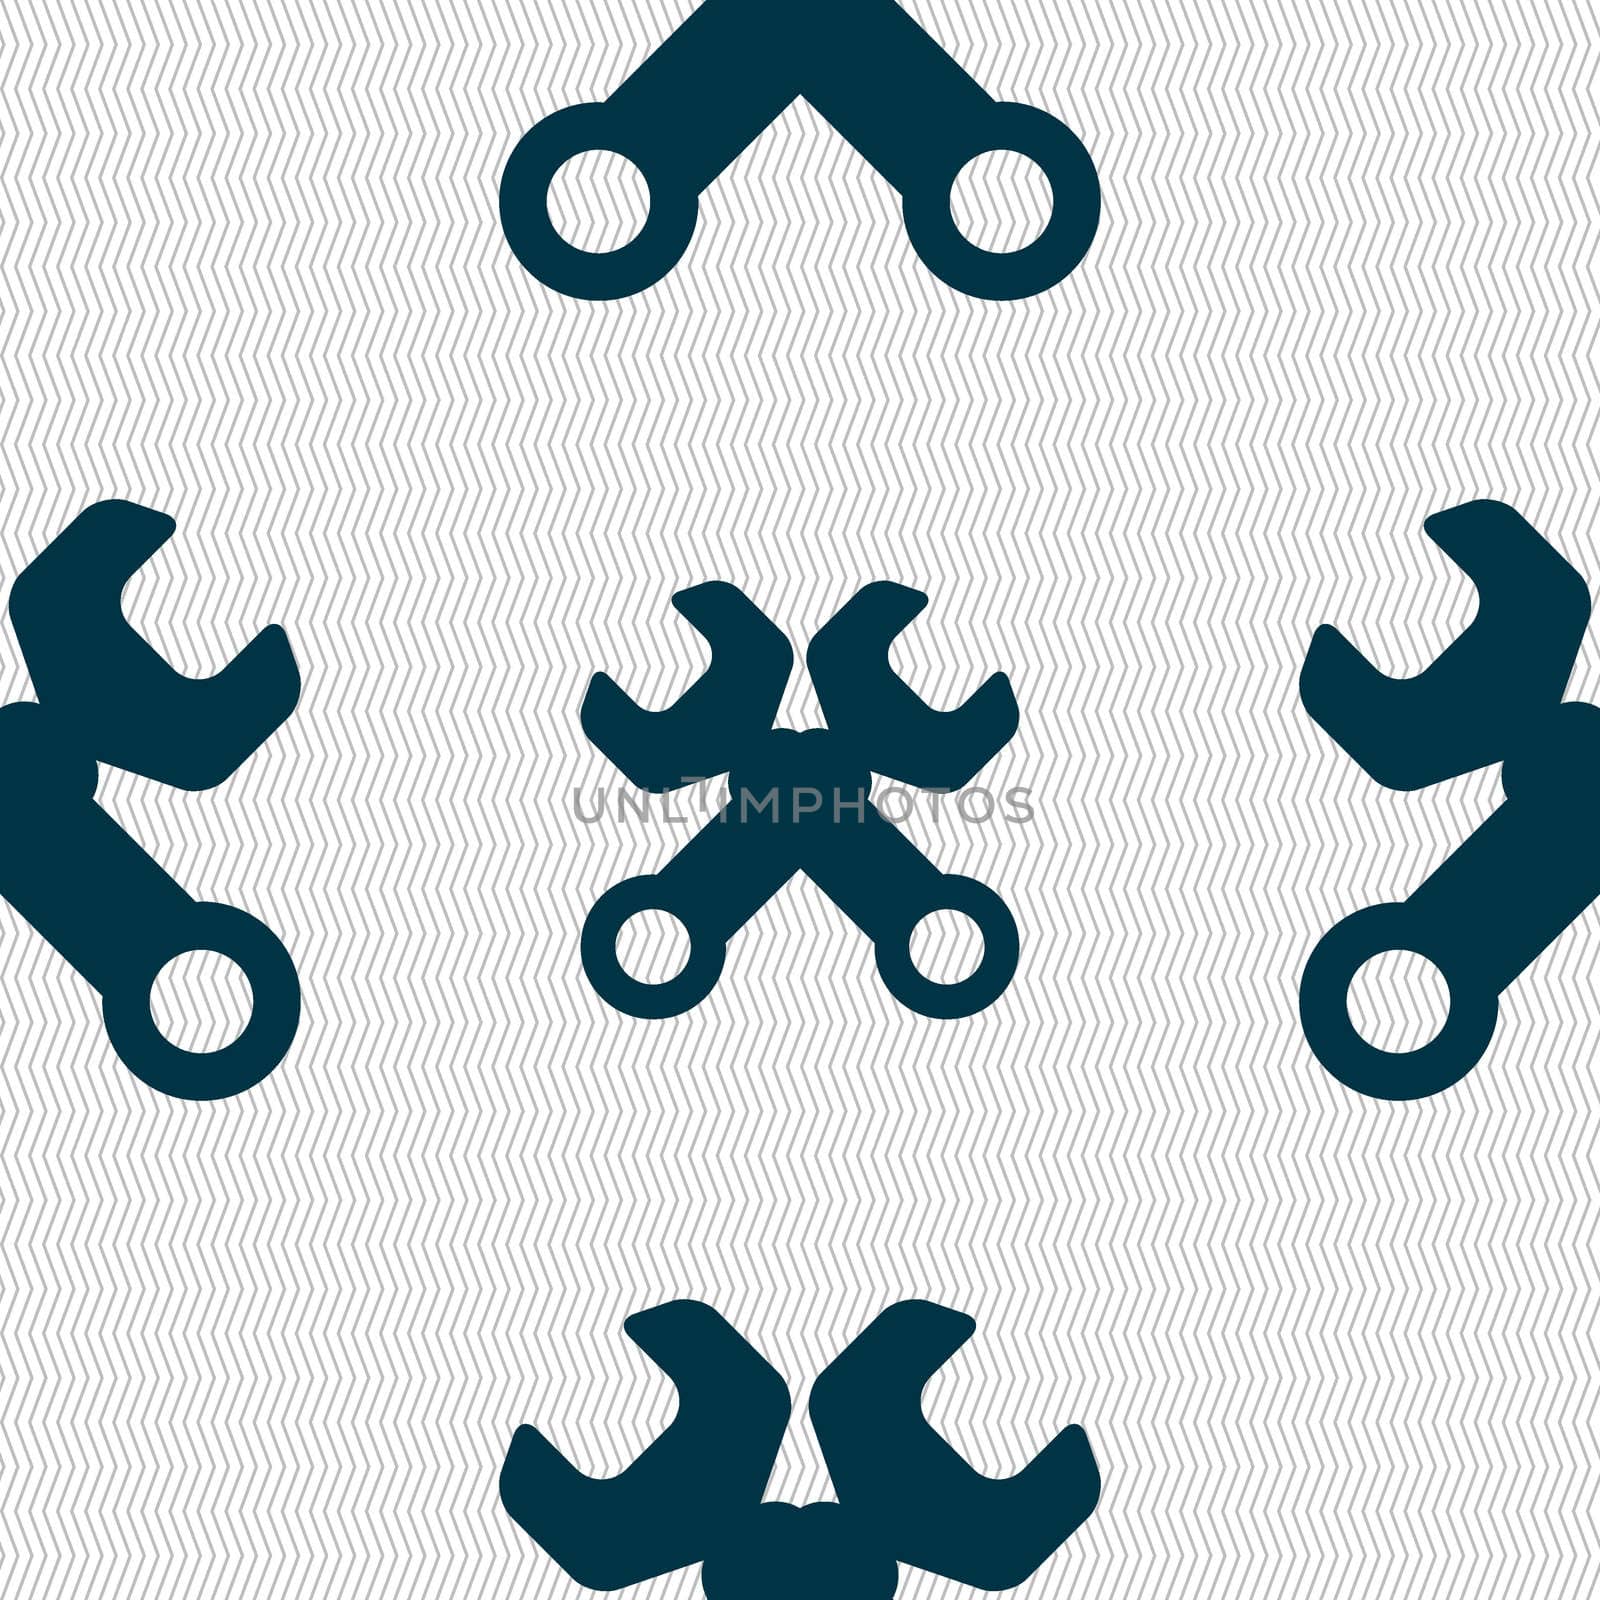 Wrench key sign icon. Service tool symbol. Seamless abstract background with geometric shapes. illustration